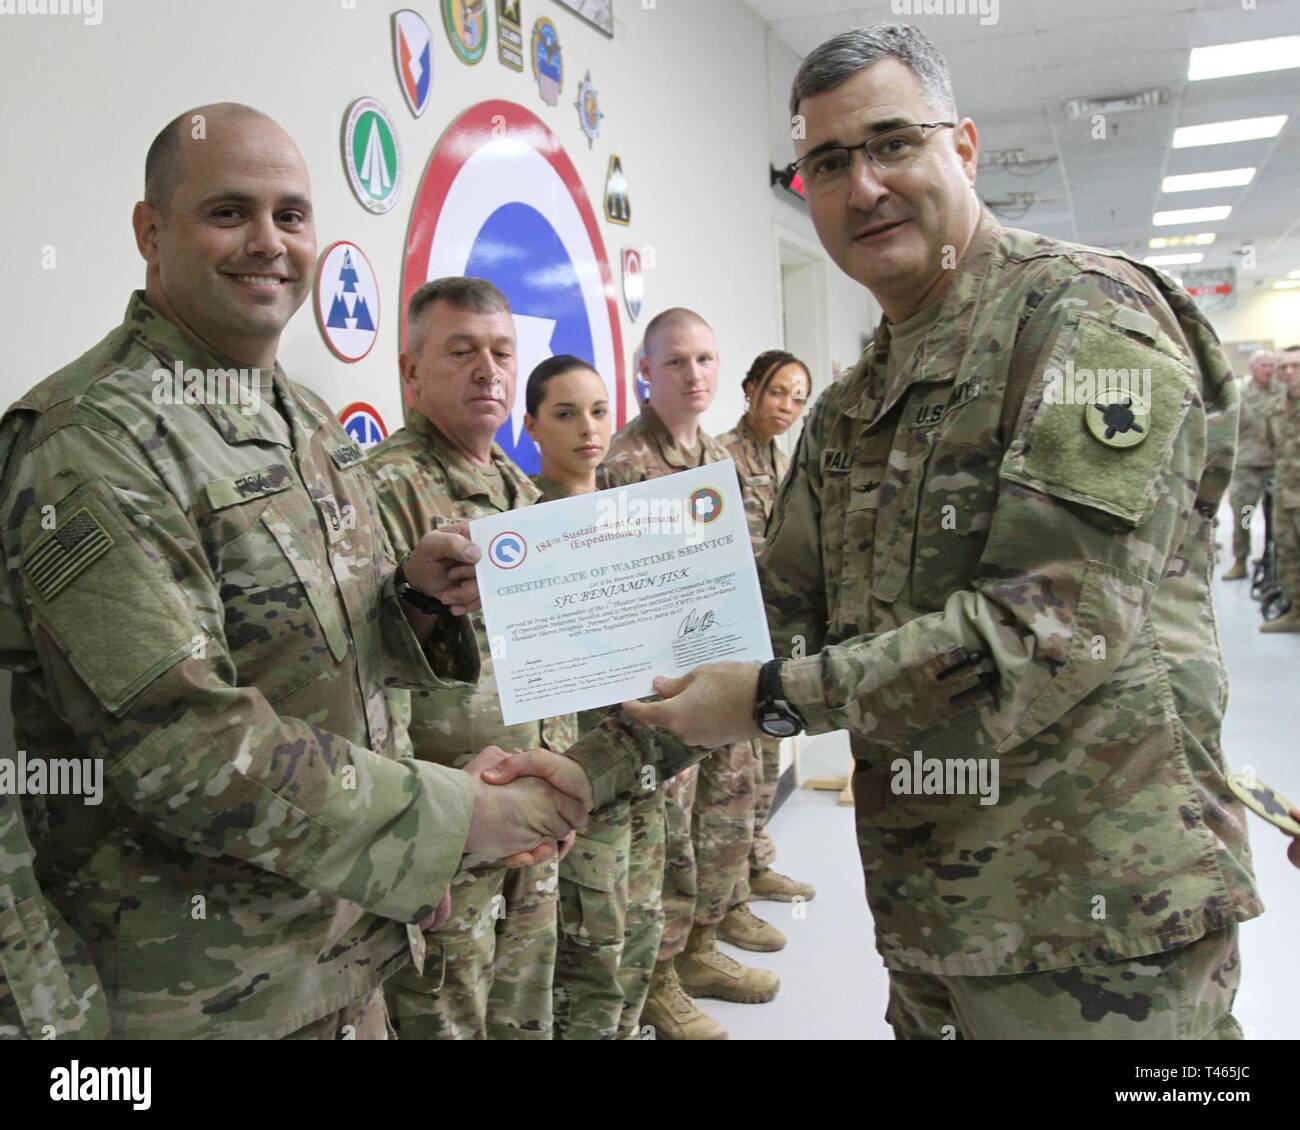 Brig. Gen. Clint E. Walker, commanding general of the 184th Sustainment Command, presents a certificate of wartime service to Sgt. 1st class Benjamin Fisk following the placement of the 184th ESC patch on his right shoulder at Camp Arifjan, Kuwait, Mar. 3, 2019. Stock Photo